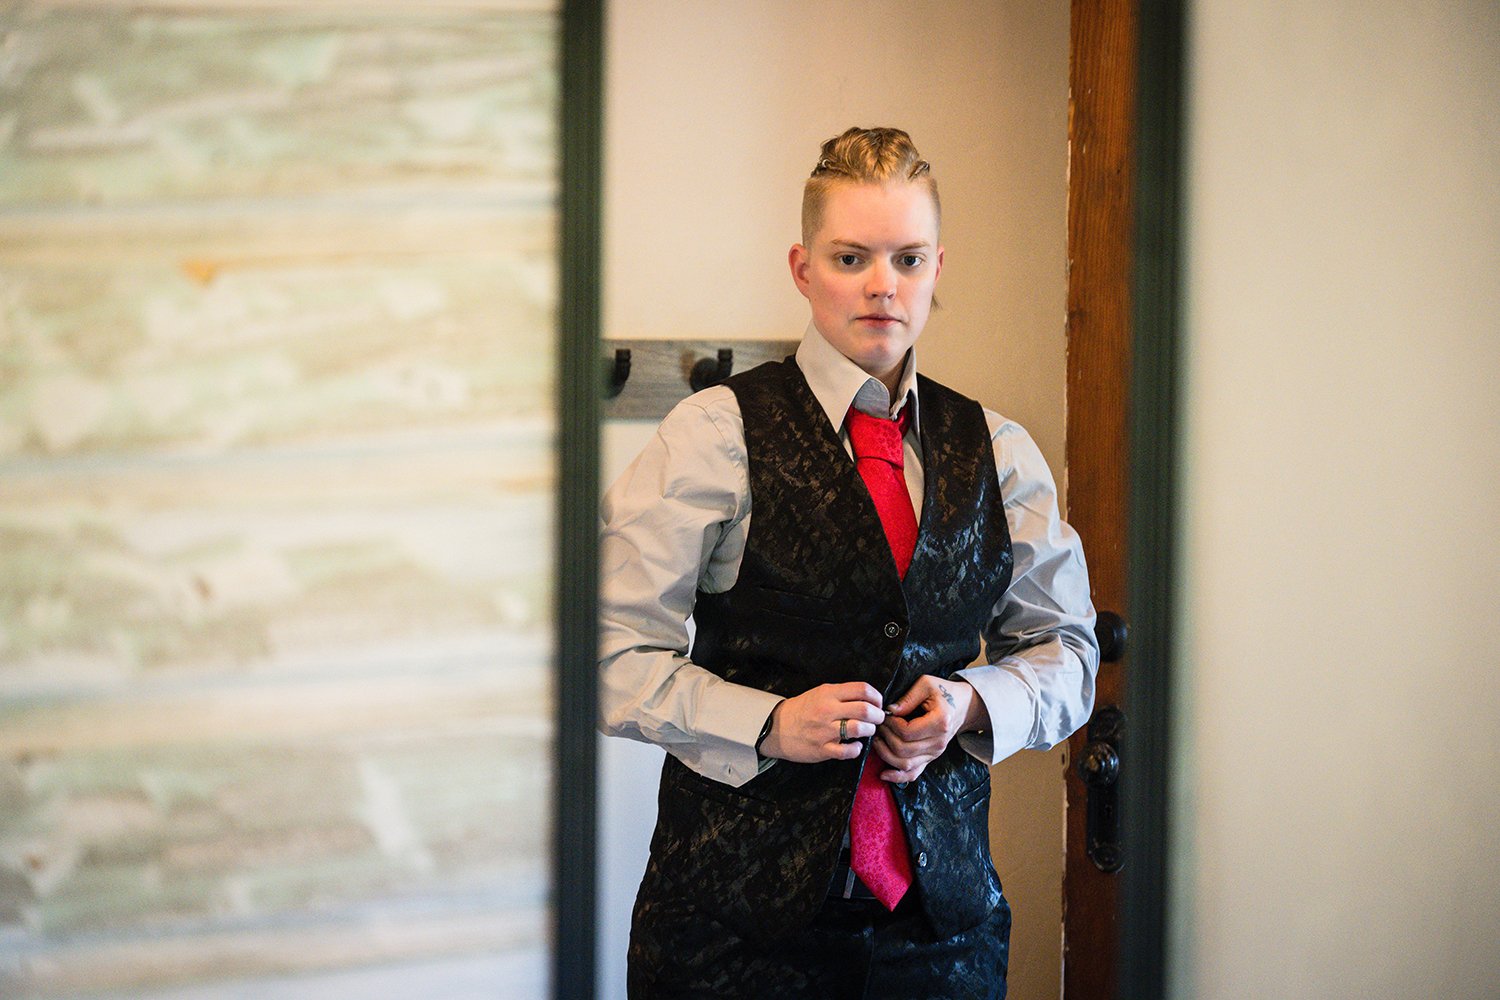 A masc lesbian bride looks in a mirror at an Airbnb and buttons up their suit vest.